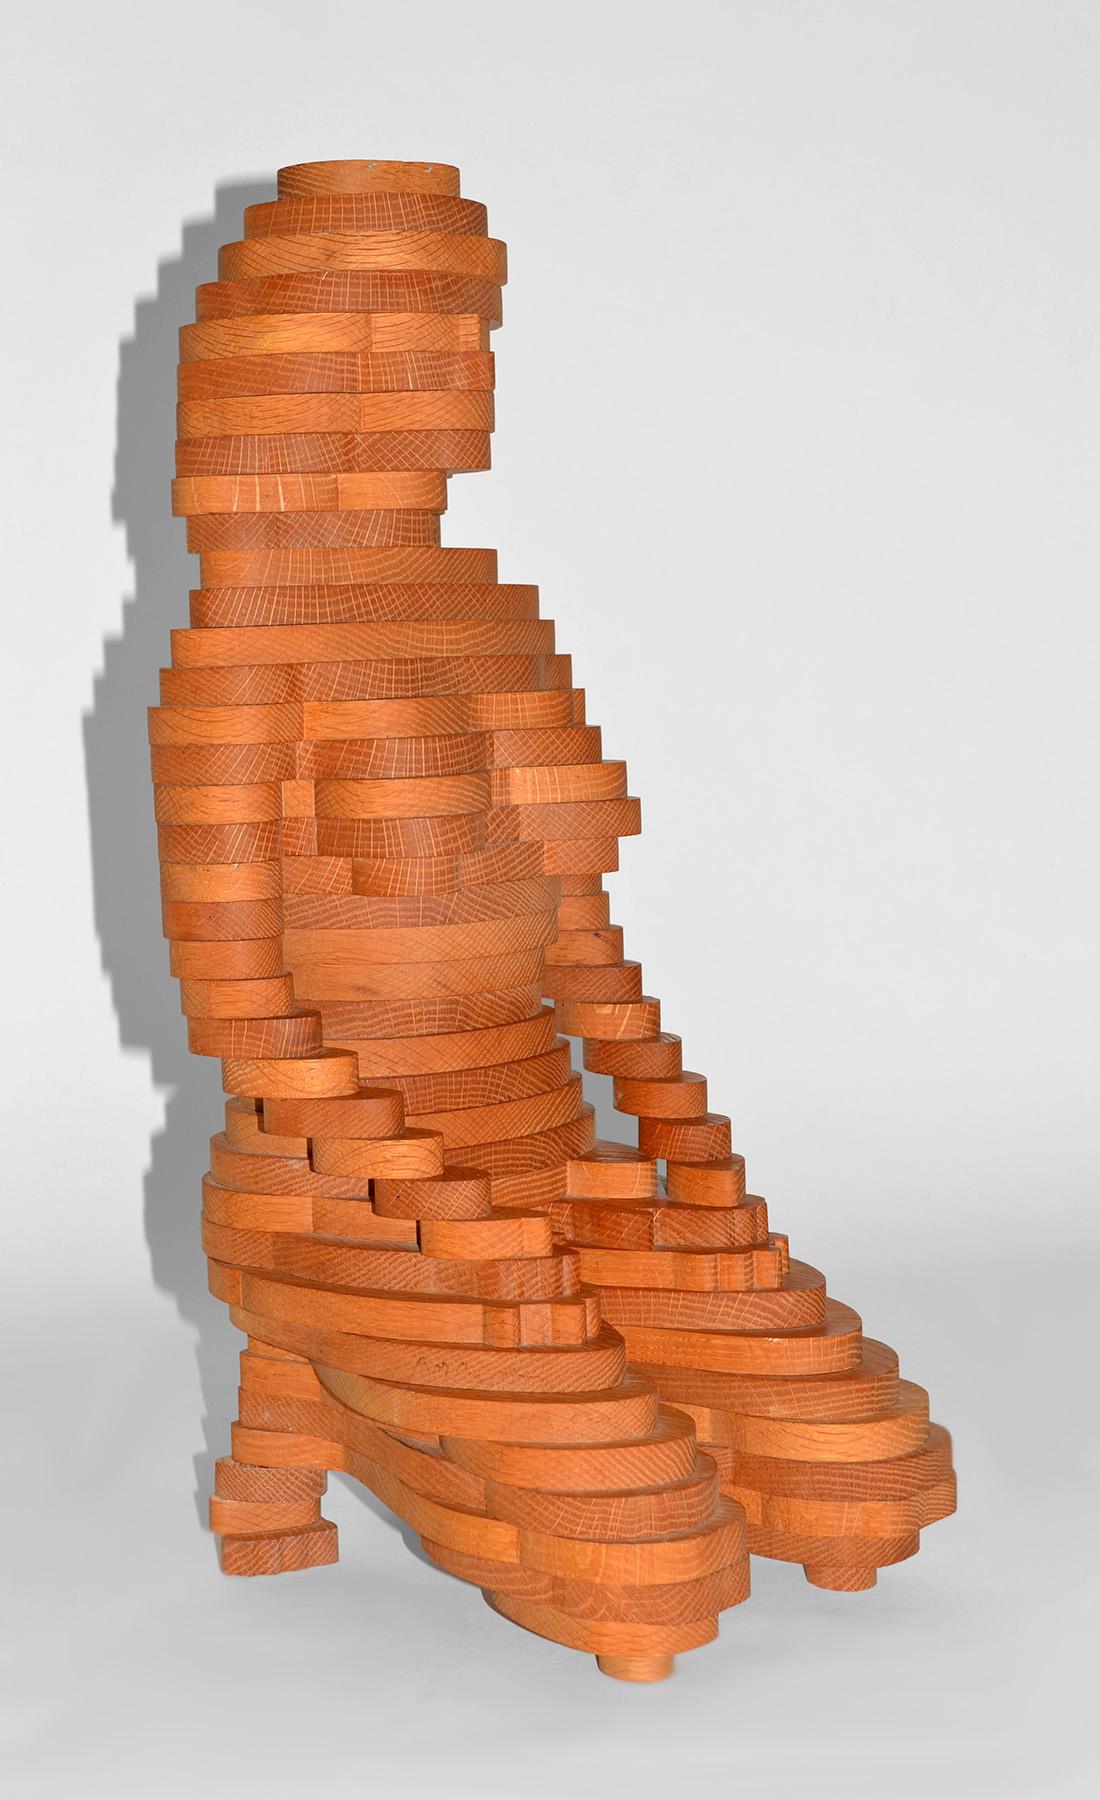 Female Sculpture in Joined Wood 3-D Cubist Surrealist by Reuben Karol, USA 1990s
Composed of cut Red Oak slats laminated into a three-dimensional sculpture, this piece is entitled 